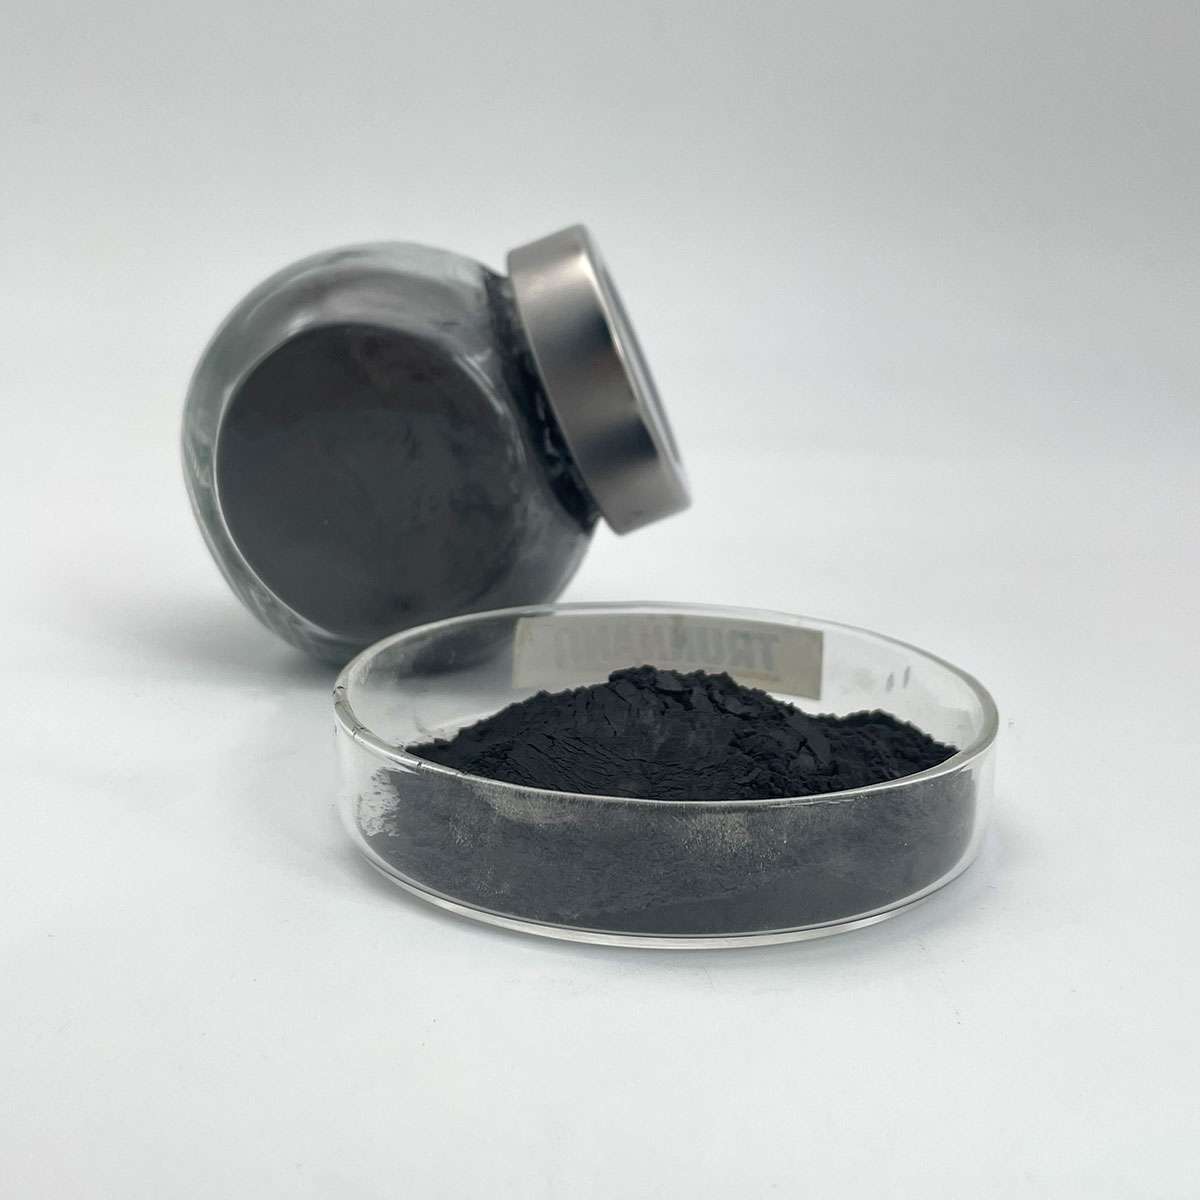 Plasma ems rf radiofrequency Molybdenum powder 3d printing and additive manufacturing 